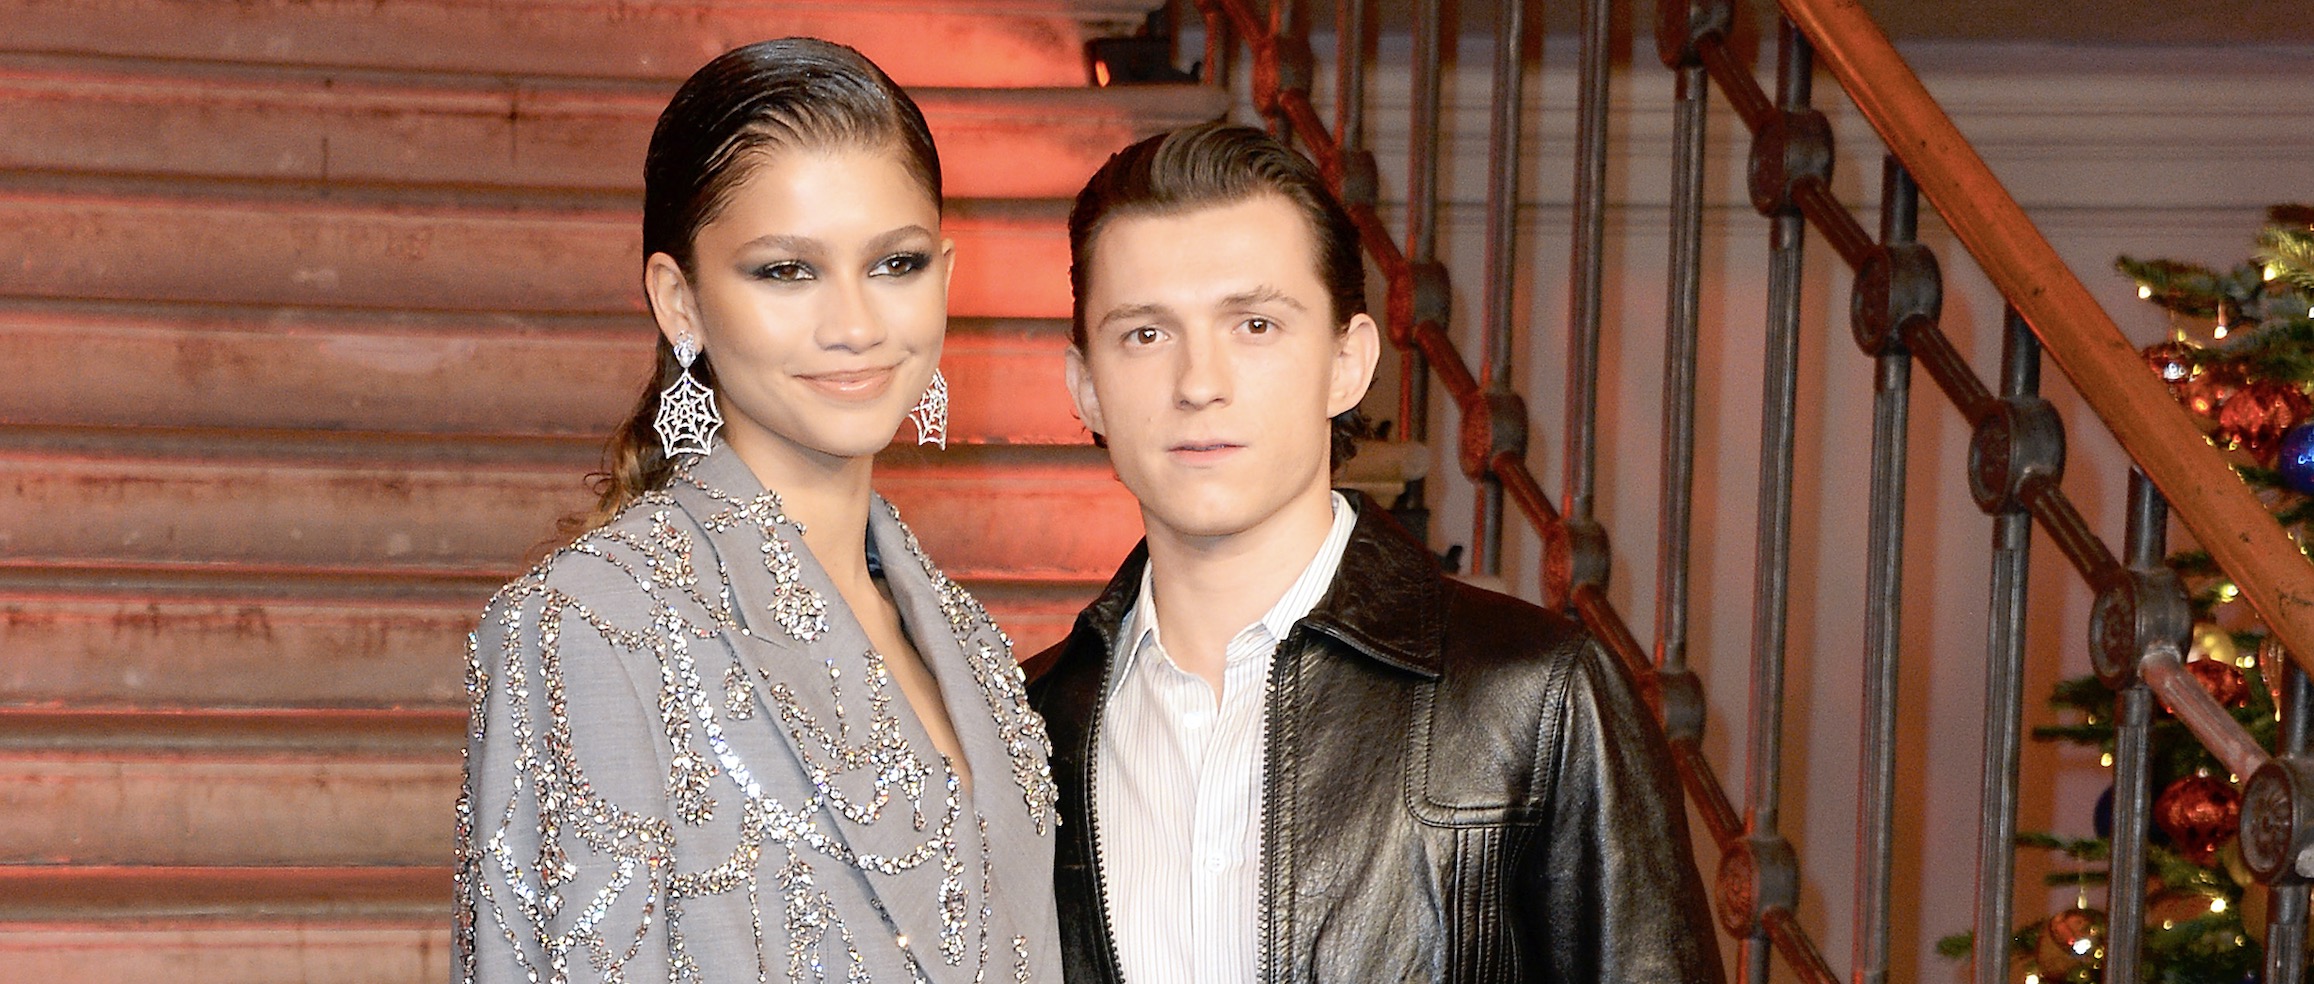 Are Zendaya And Tom Holland Getting Married? – GoneTrending